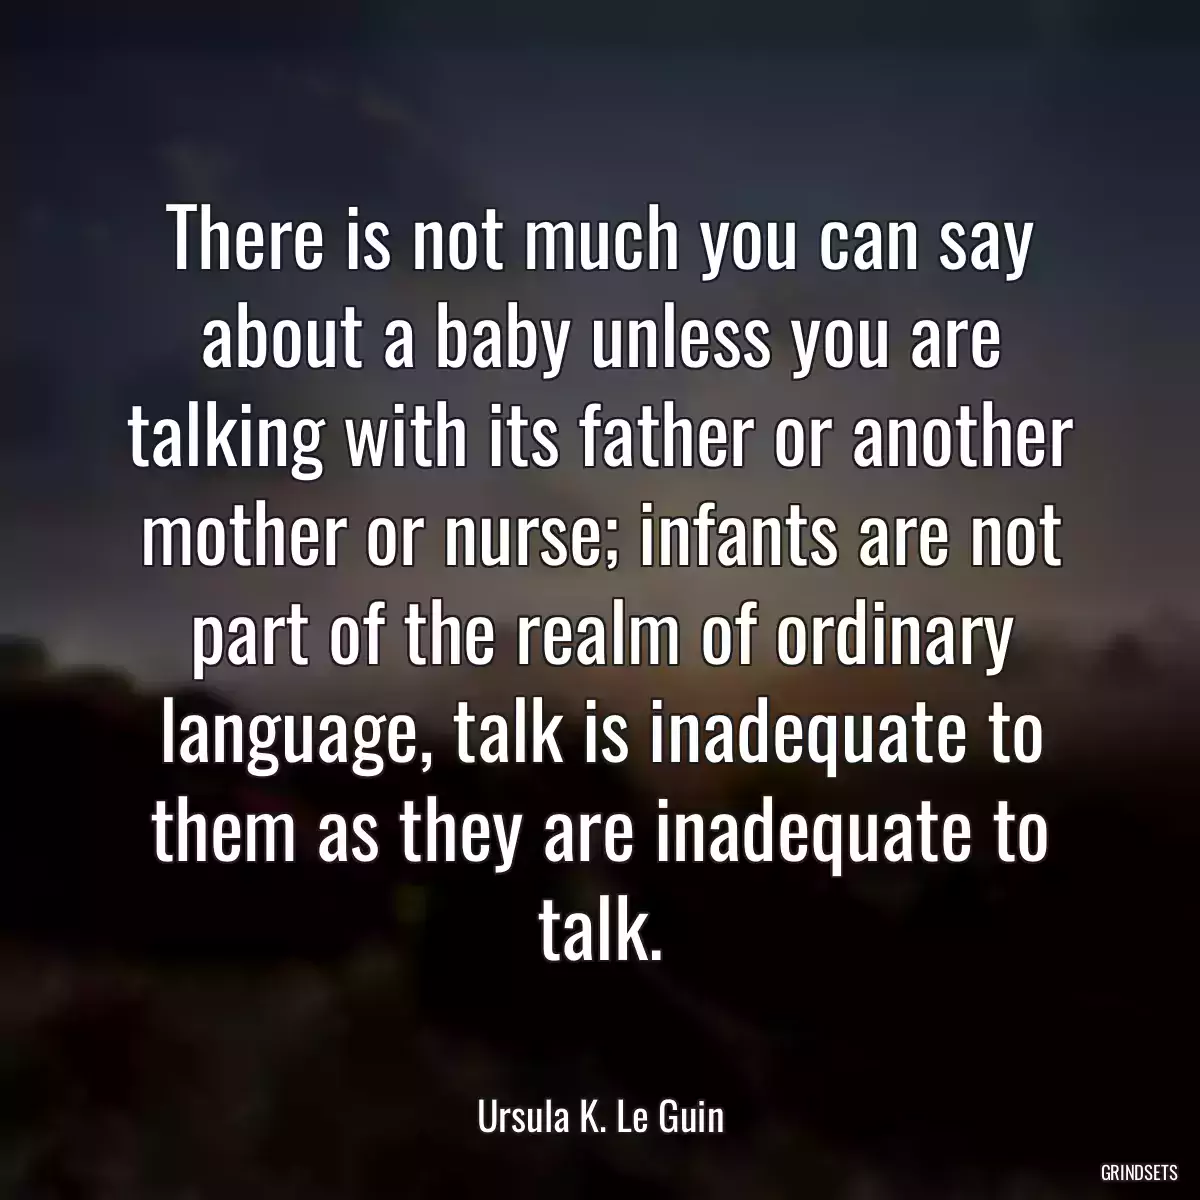 There is not much you can say about a baby unless you are talking with its father or another mother or nurse; infants are not part of the realm of ordinary language, talk is inadequate to them as they are inadequate to talk.